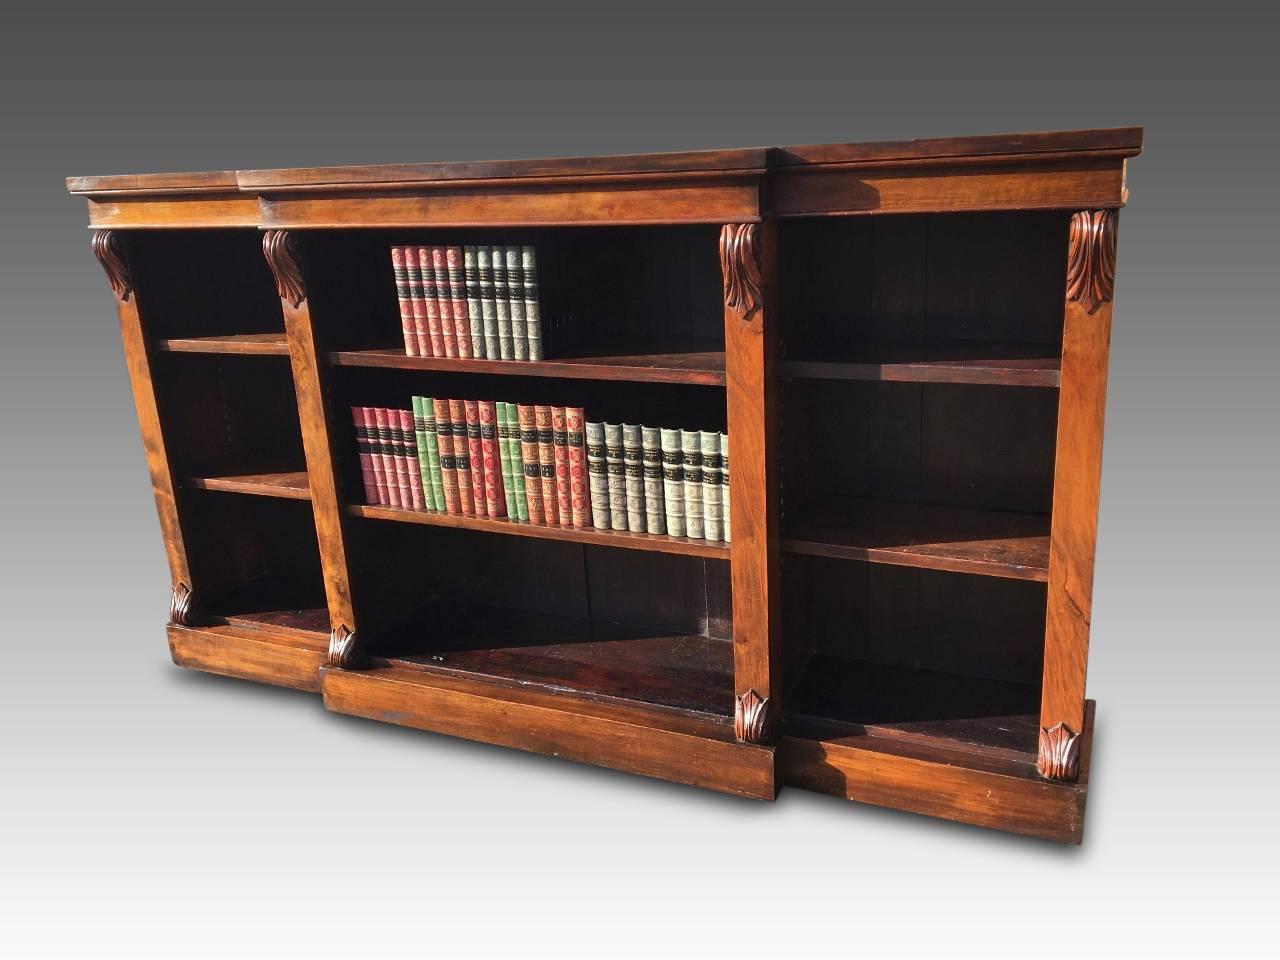 Early Victorian figured walnut open bookcase with adjustable shelves, circa 1870.
This attractive bookcase is of brake front design, with six adjustable shelves. The shelf depth in the widest middle section is 11 inches and 8.5 inches in the two